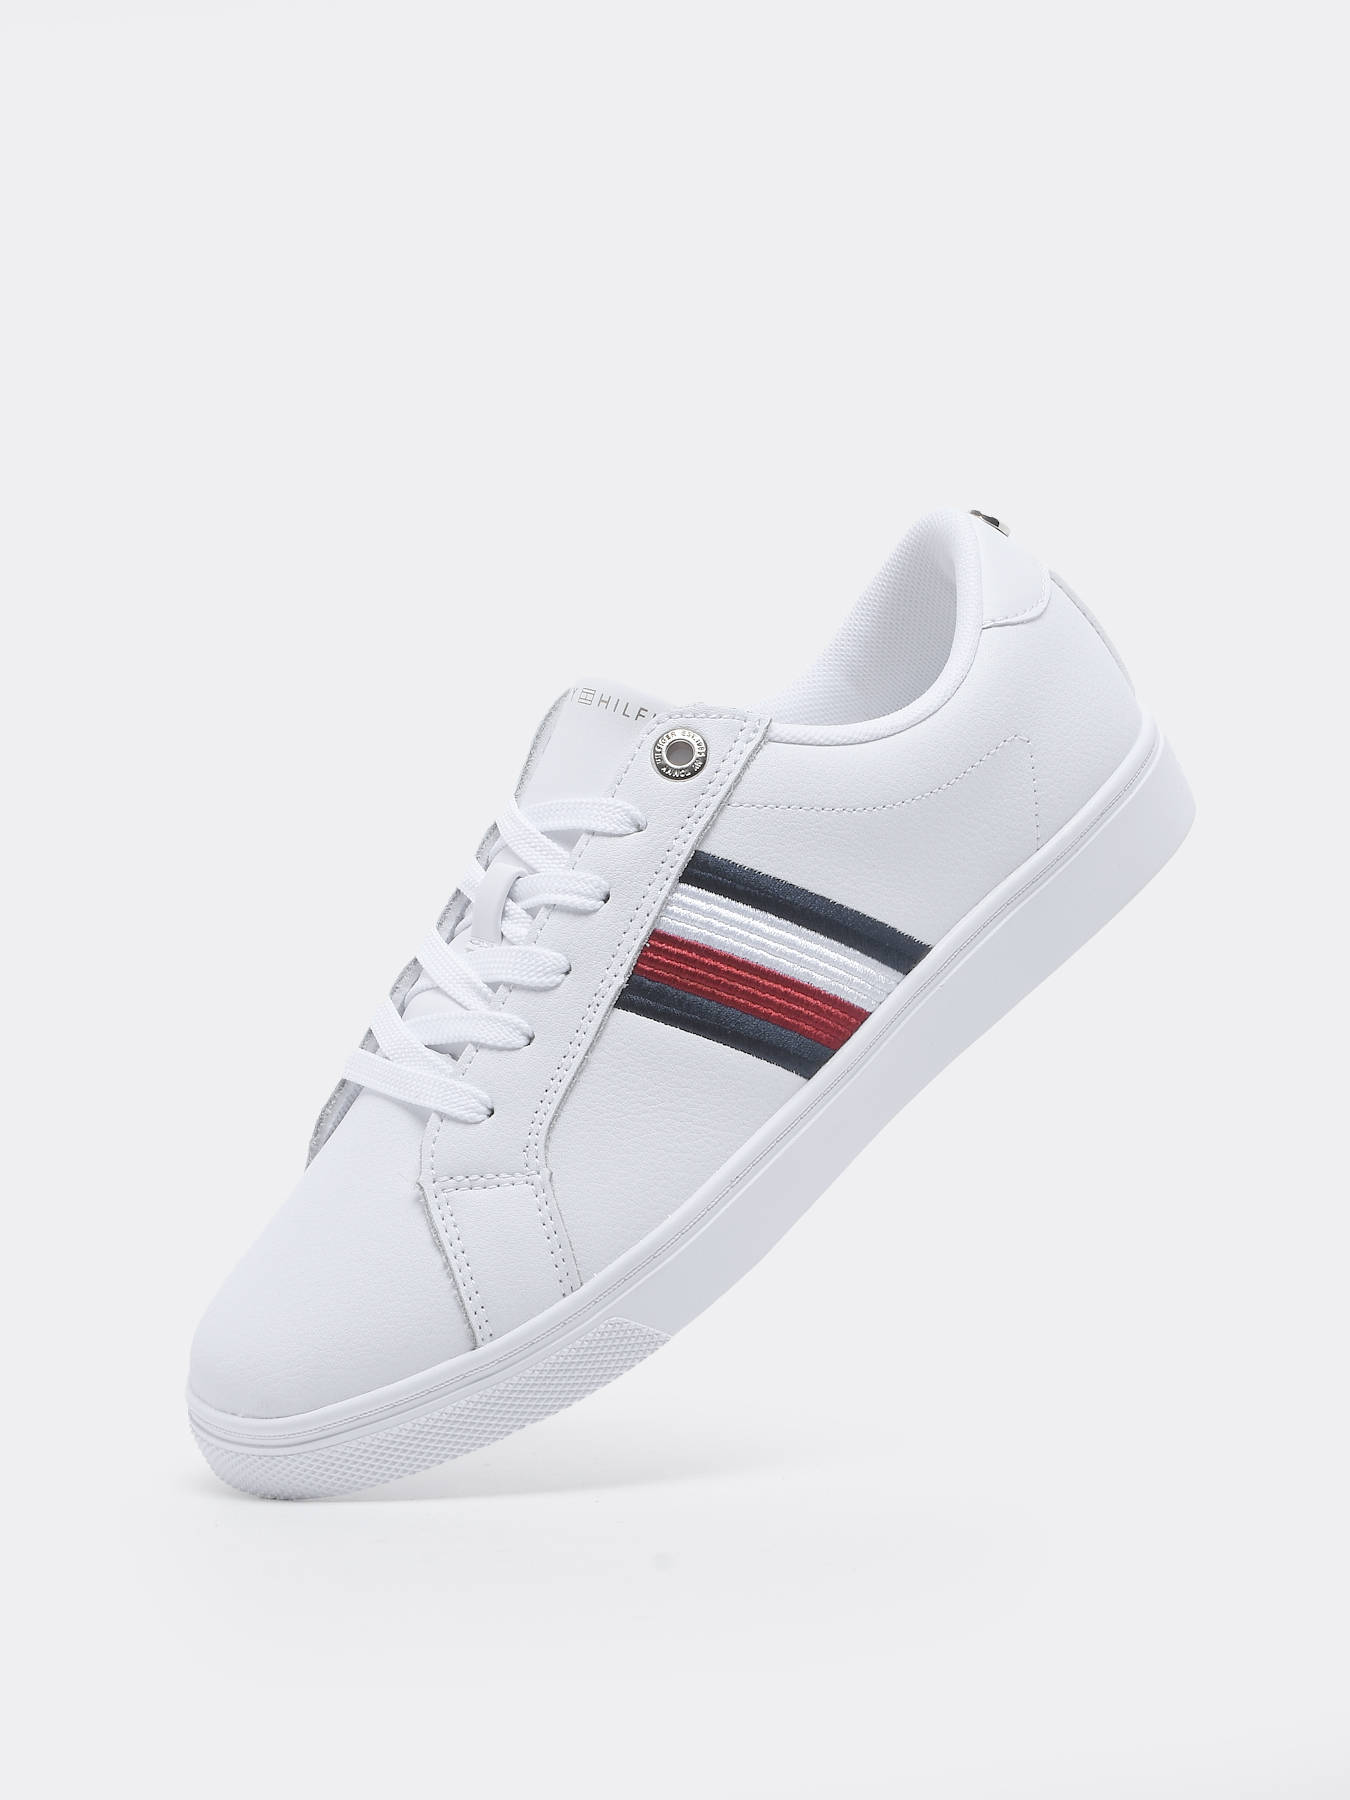 Tommy Hilfiger Sneakers ESSENTIAL STRIPES SN - best prices